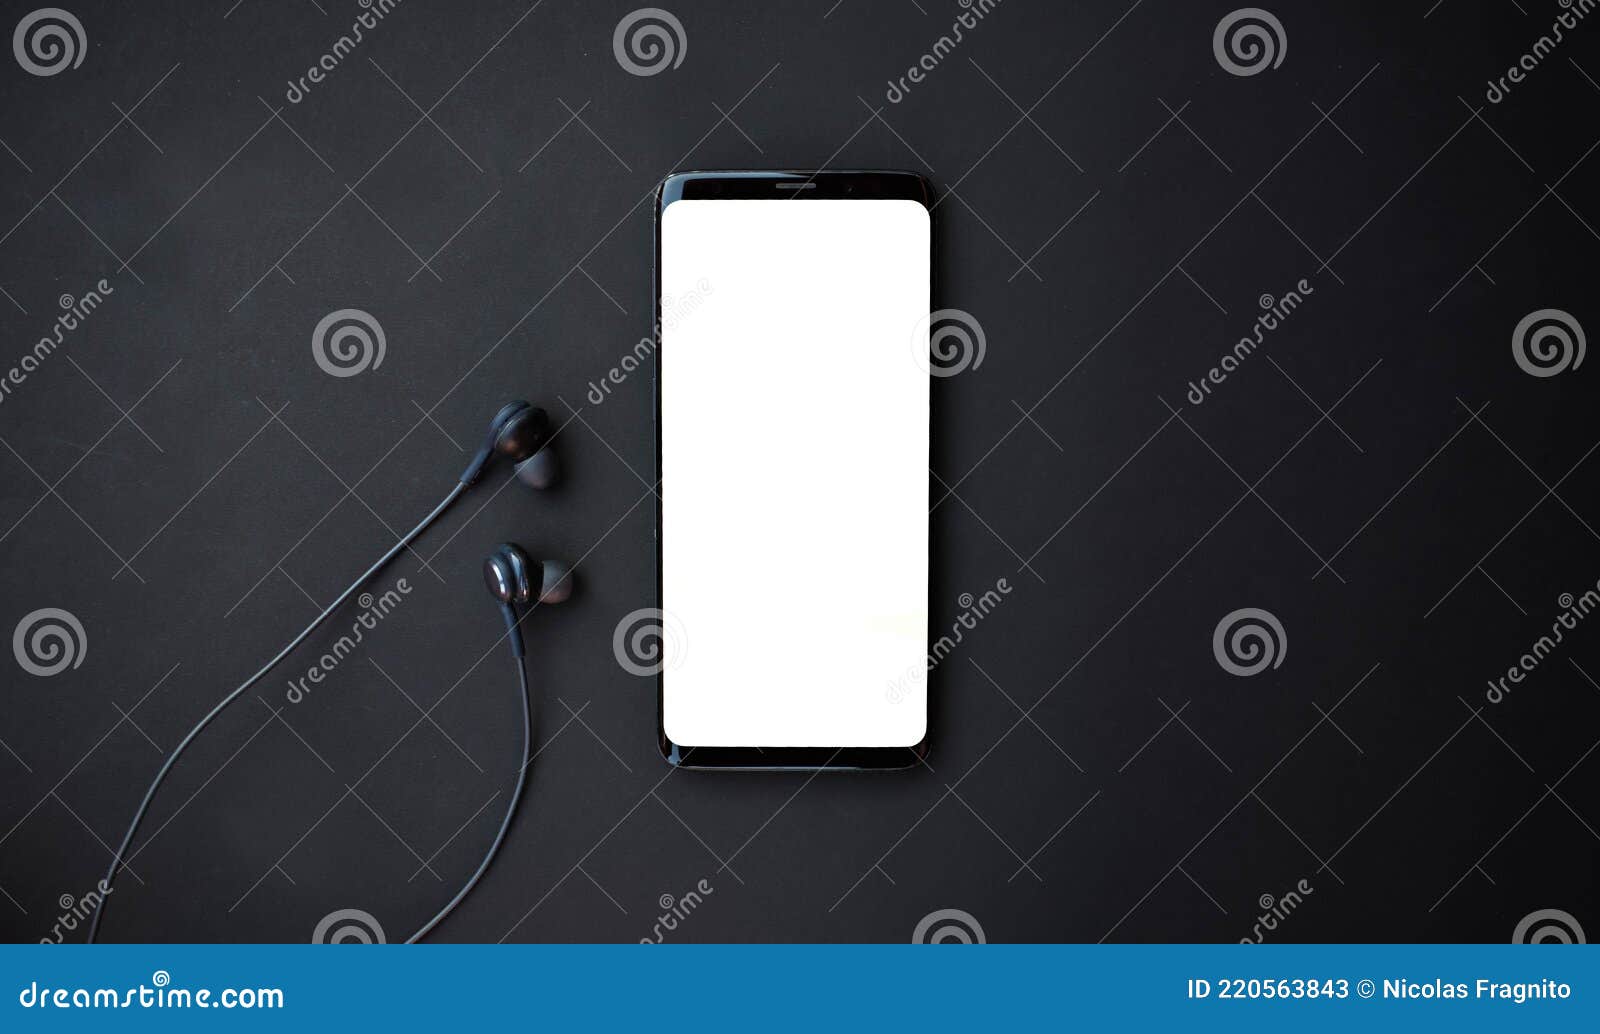 black smartphone and headset on black background. top view with copy space